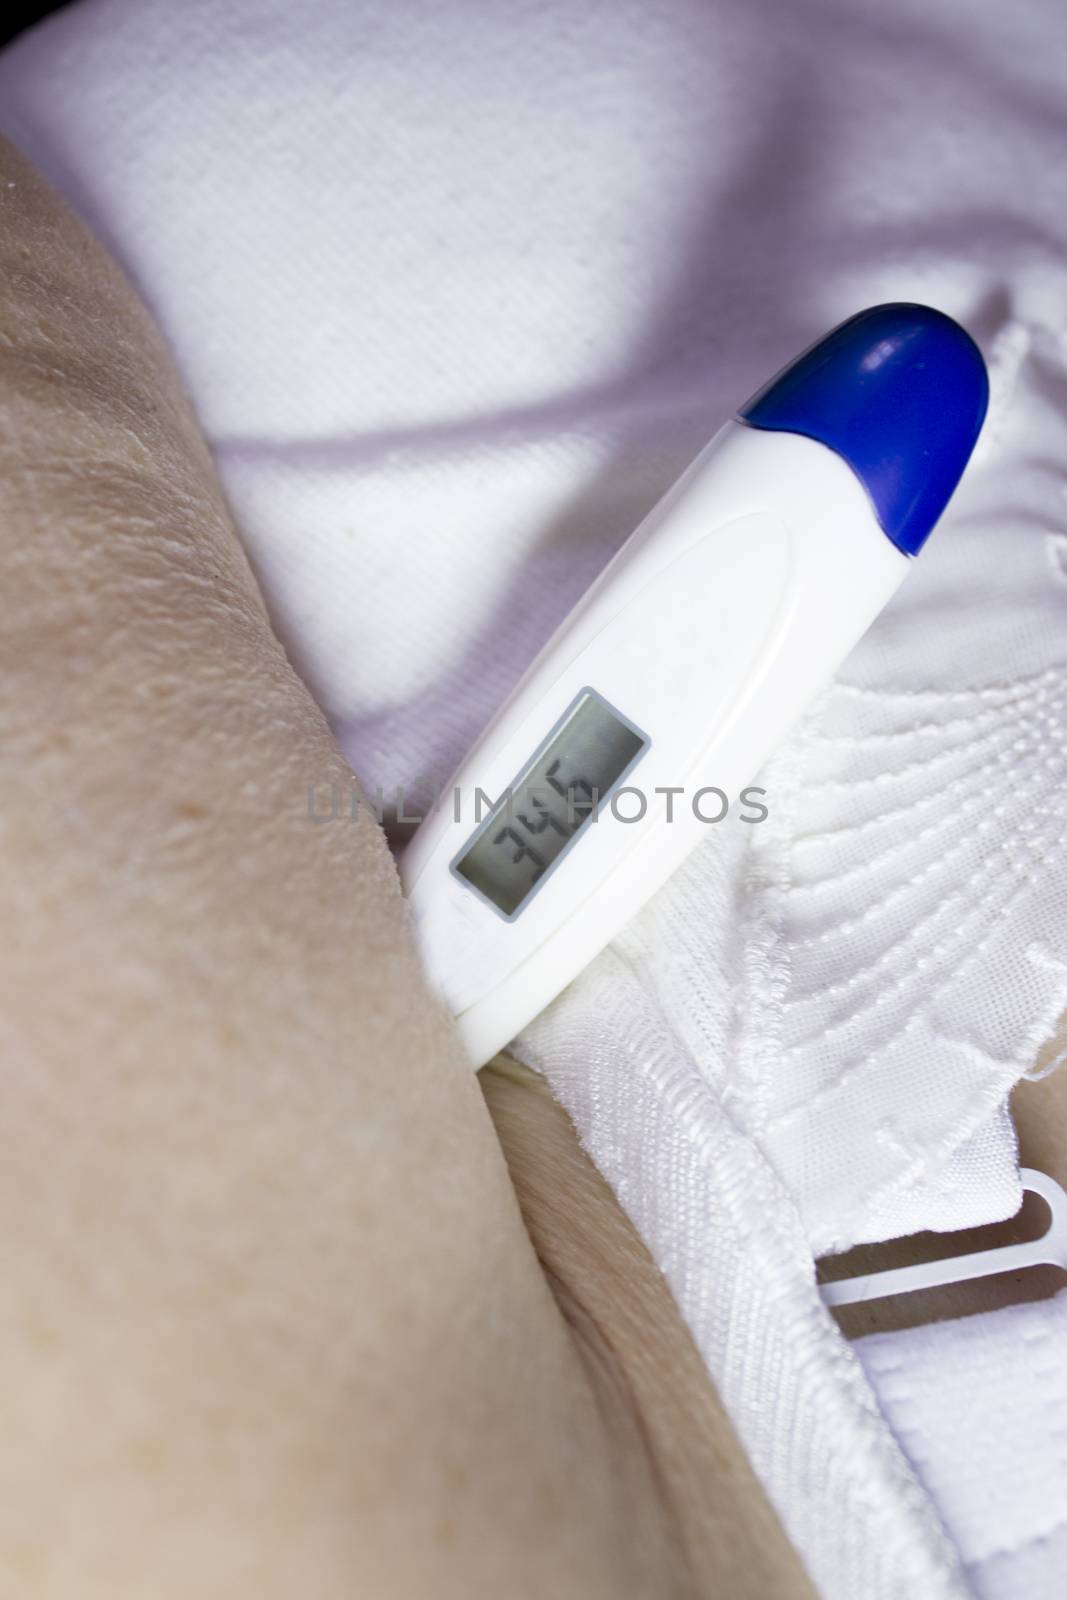 Digital thermometer measuring temperature to old woman in armpit